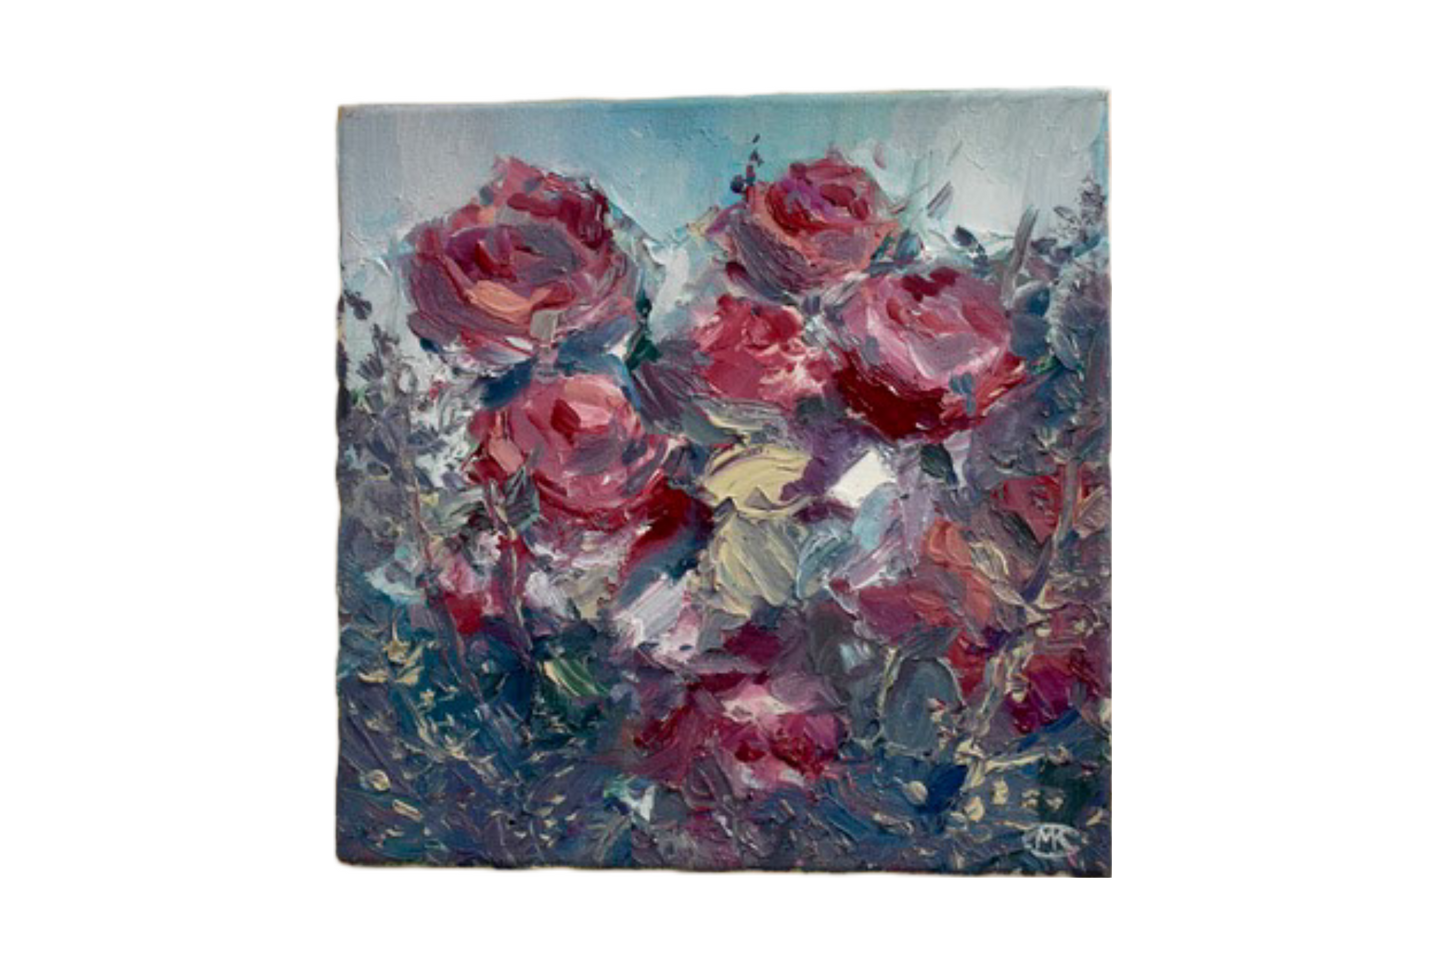 'Old Roses' by Christina Meyer-King